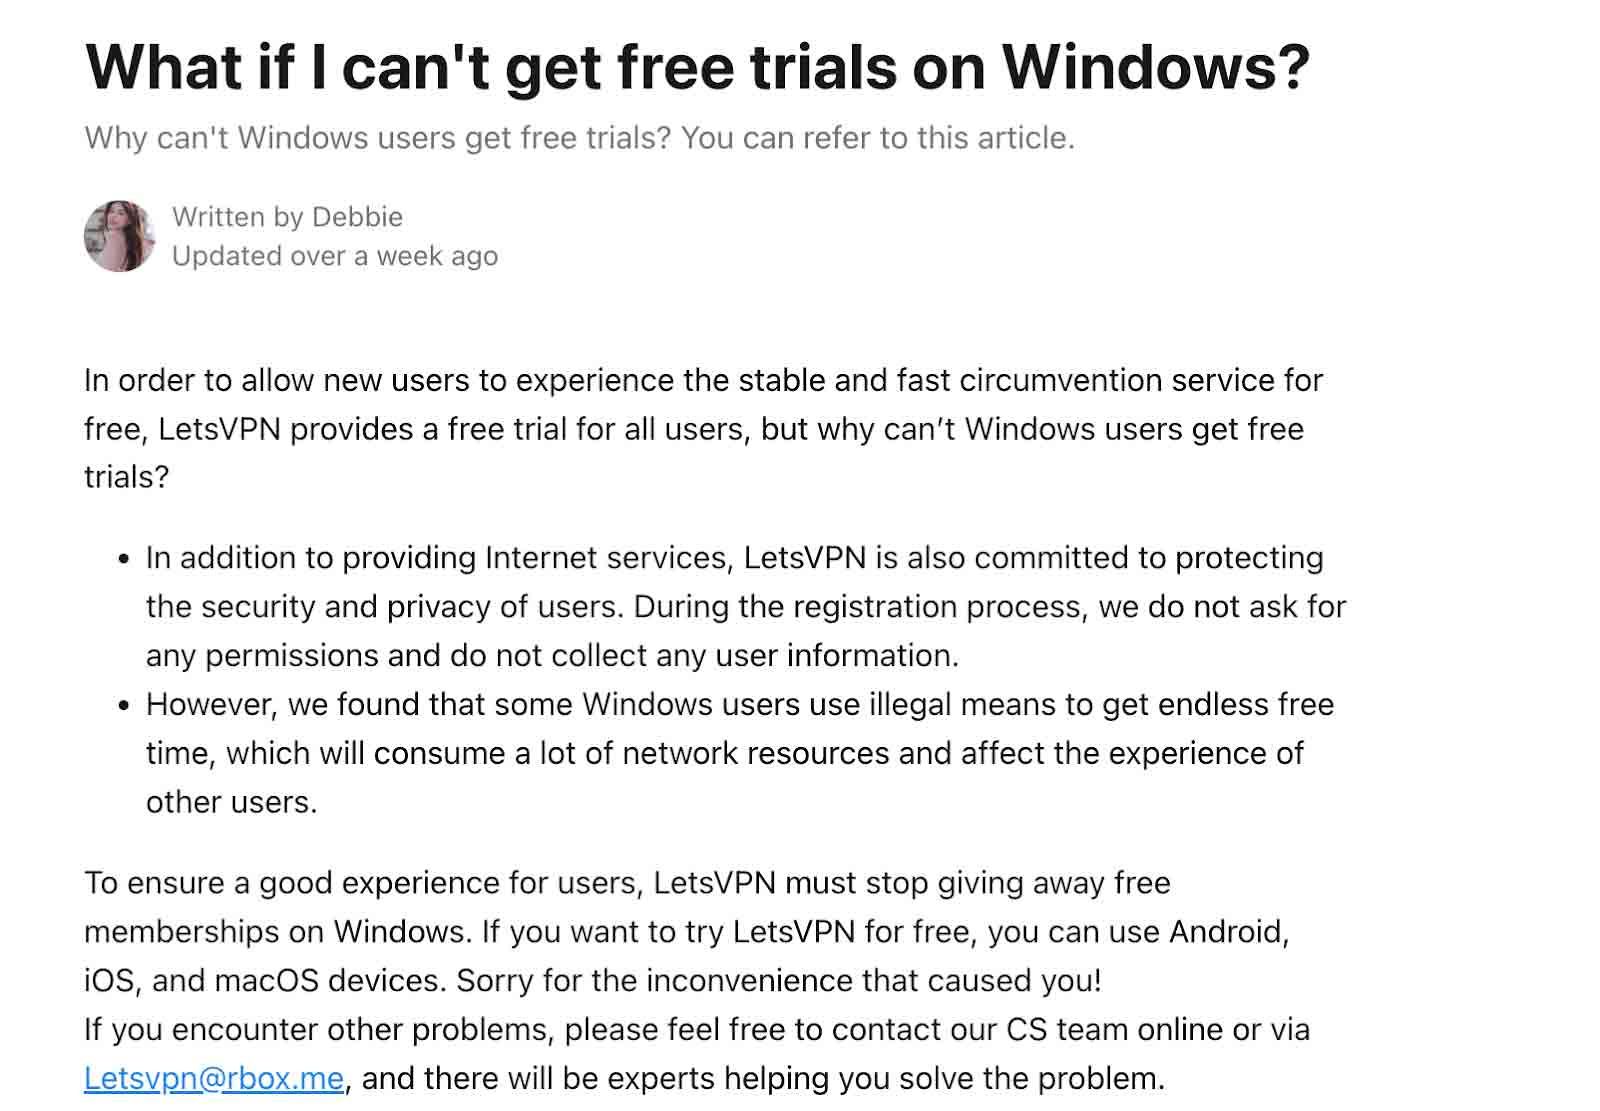 what if you can't get free trails on windows